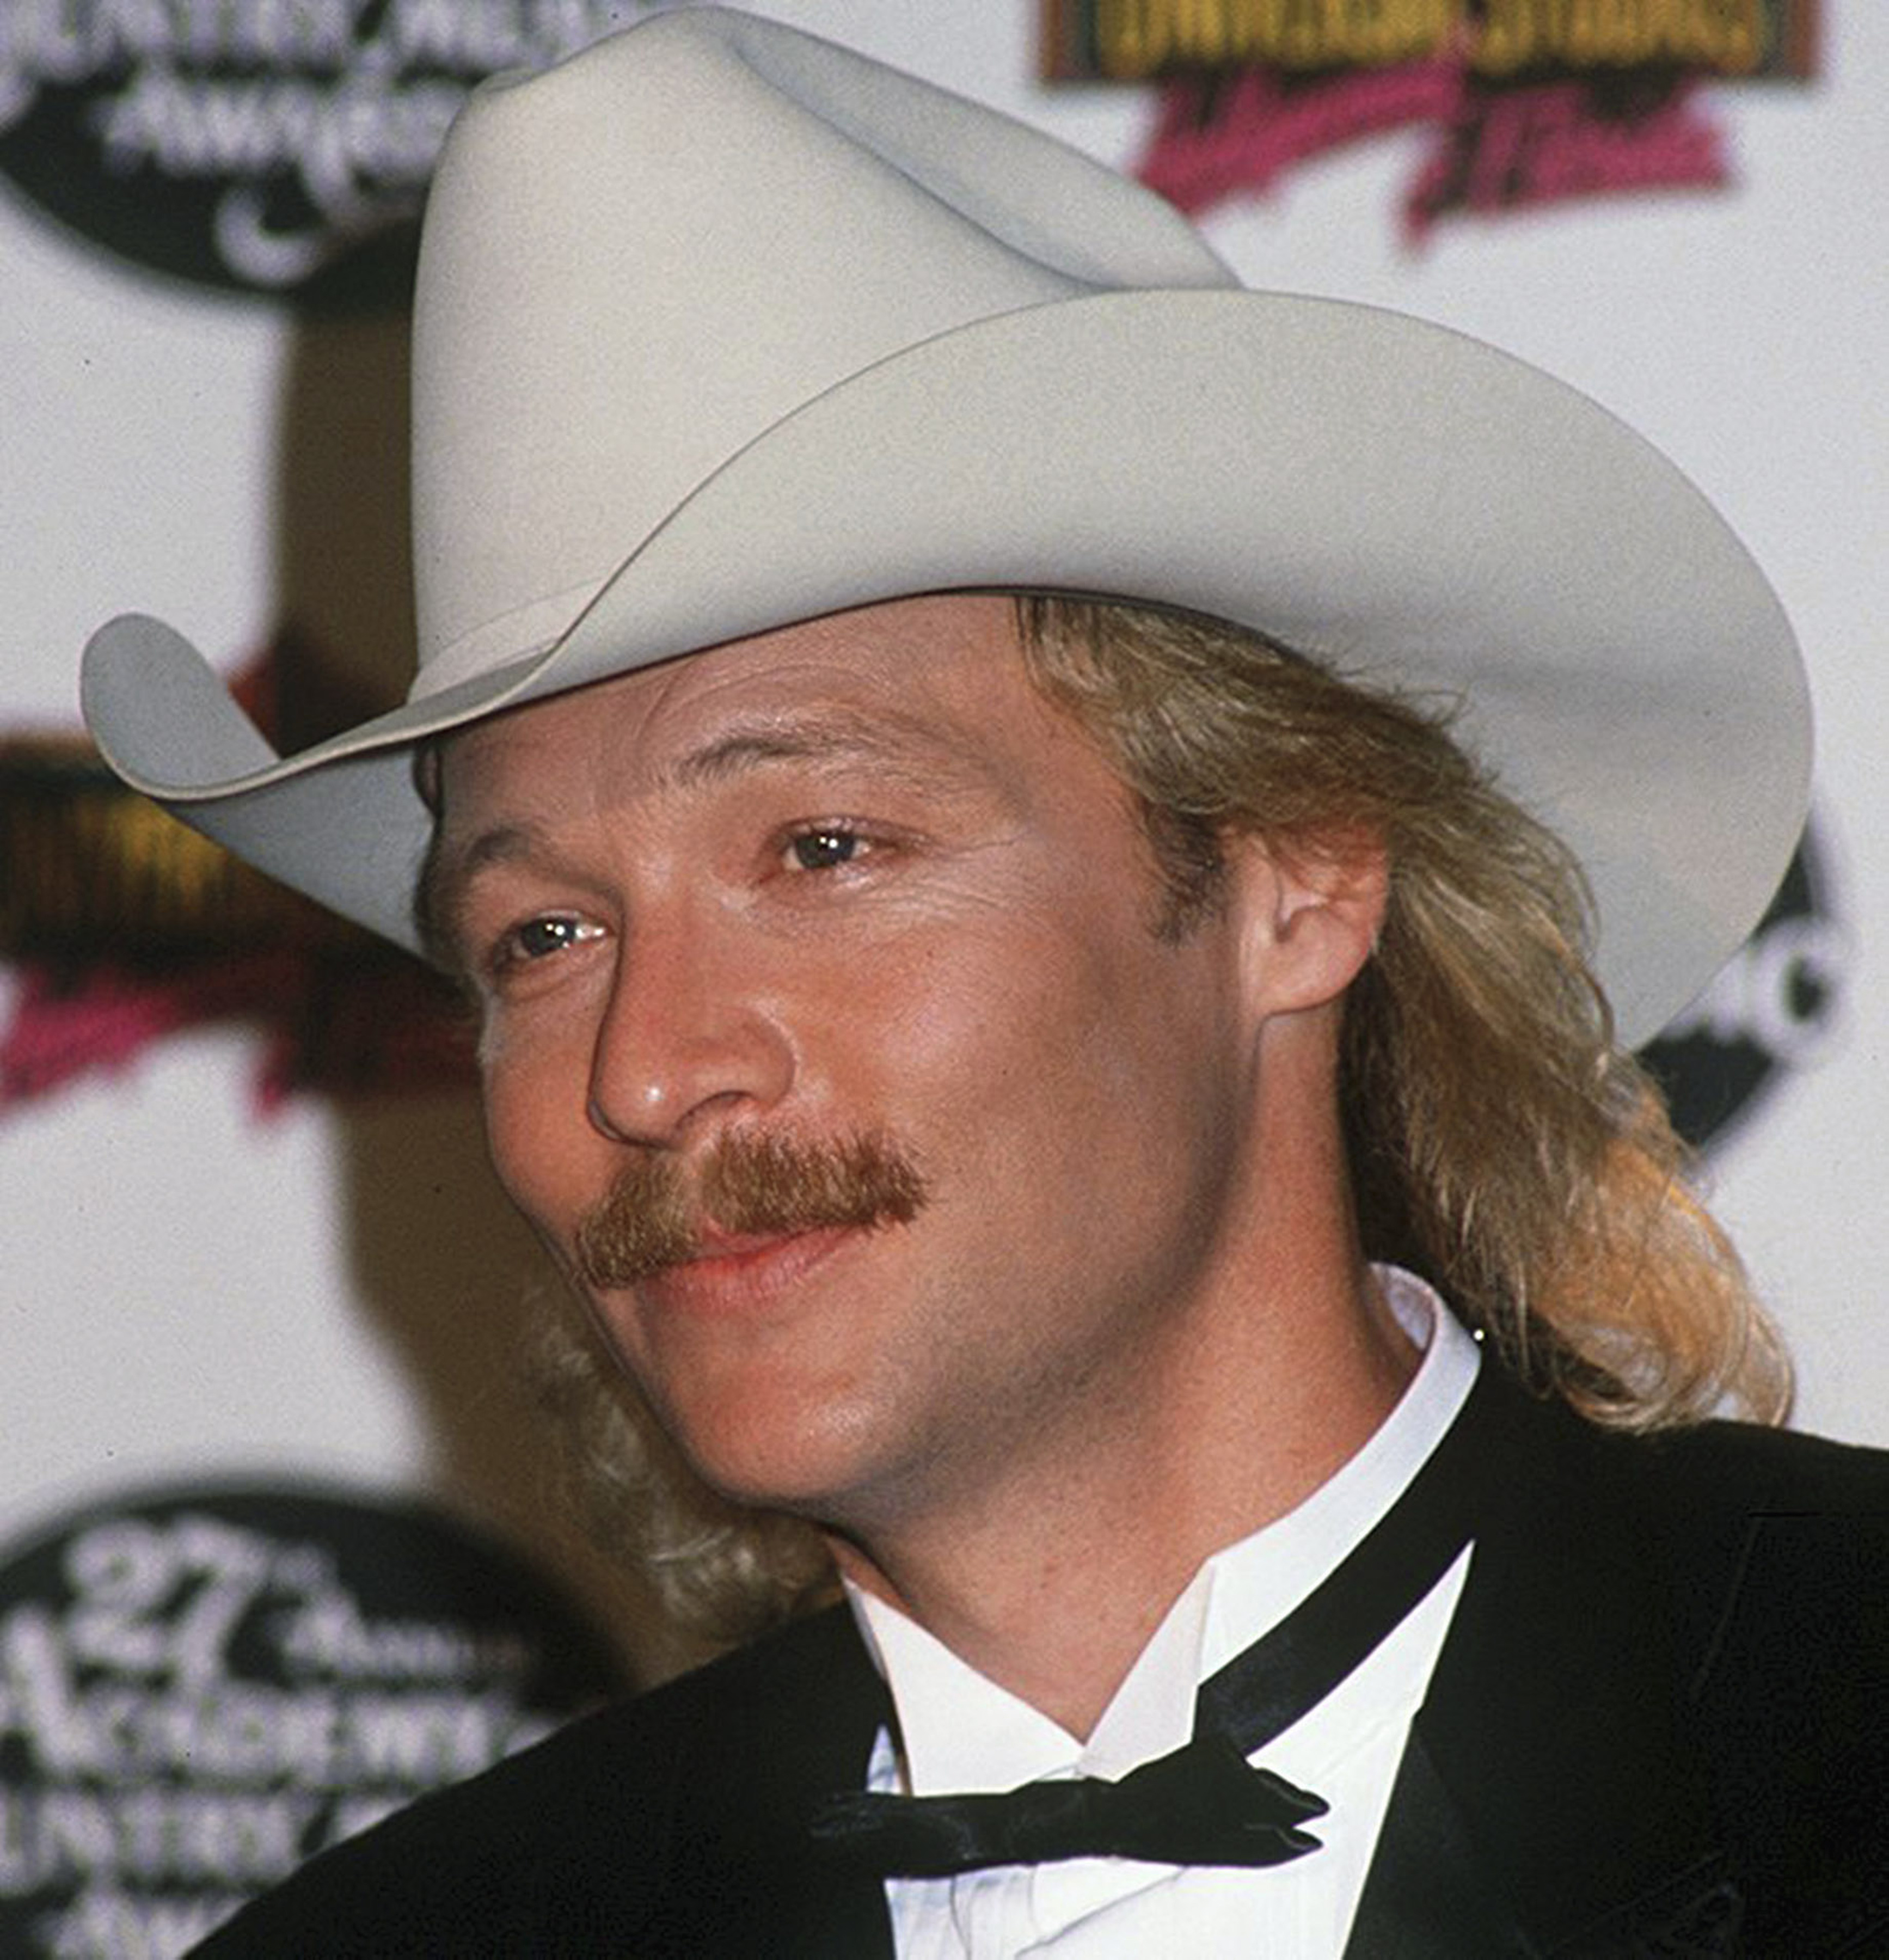 Alan Jackson at the 27th Annual Academy of Country Music Awards on April 29, 1992 | Source: Getty Images